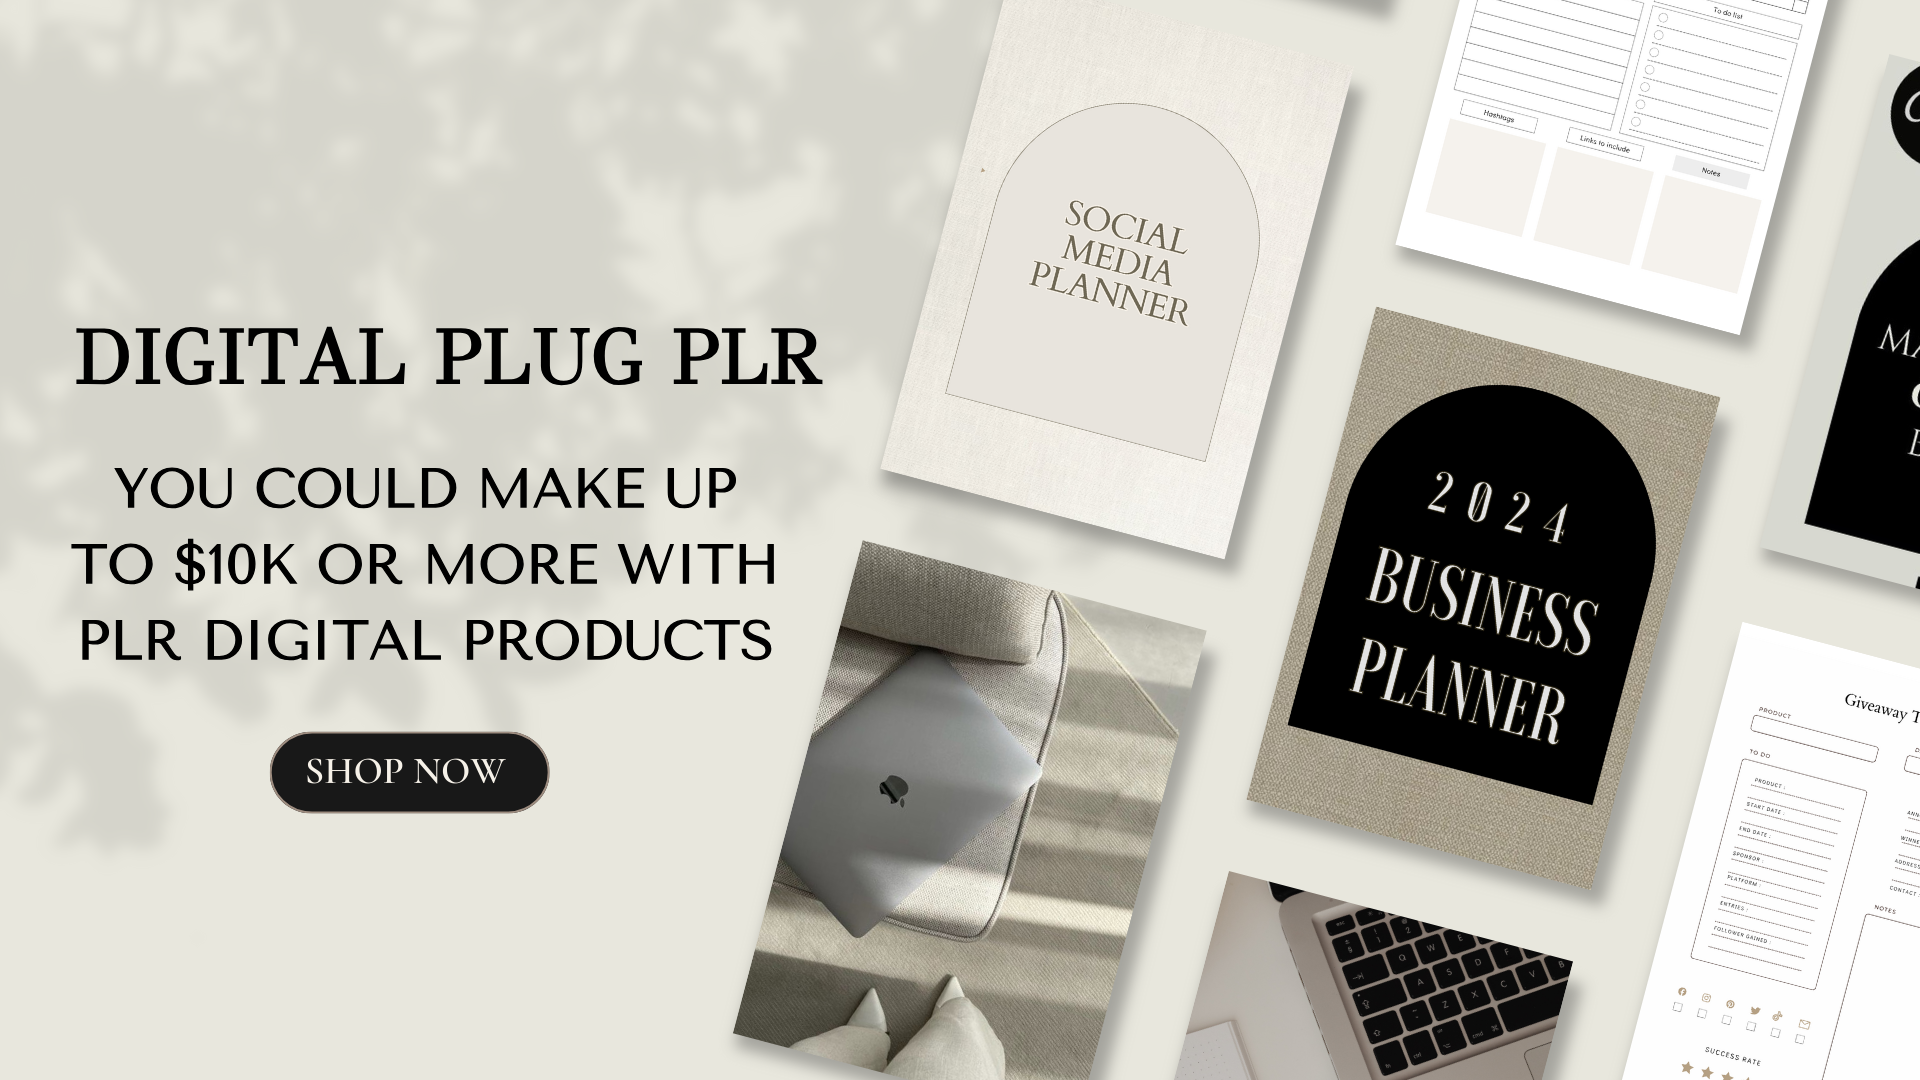 We are a PLR (Private Label Rights) store created to help you make money online with done for digital products.